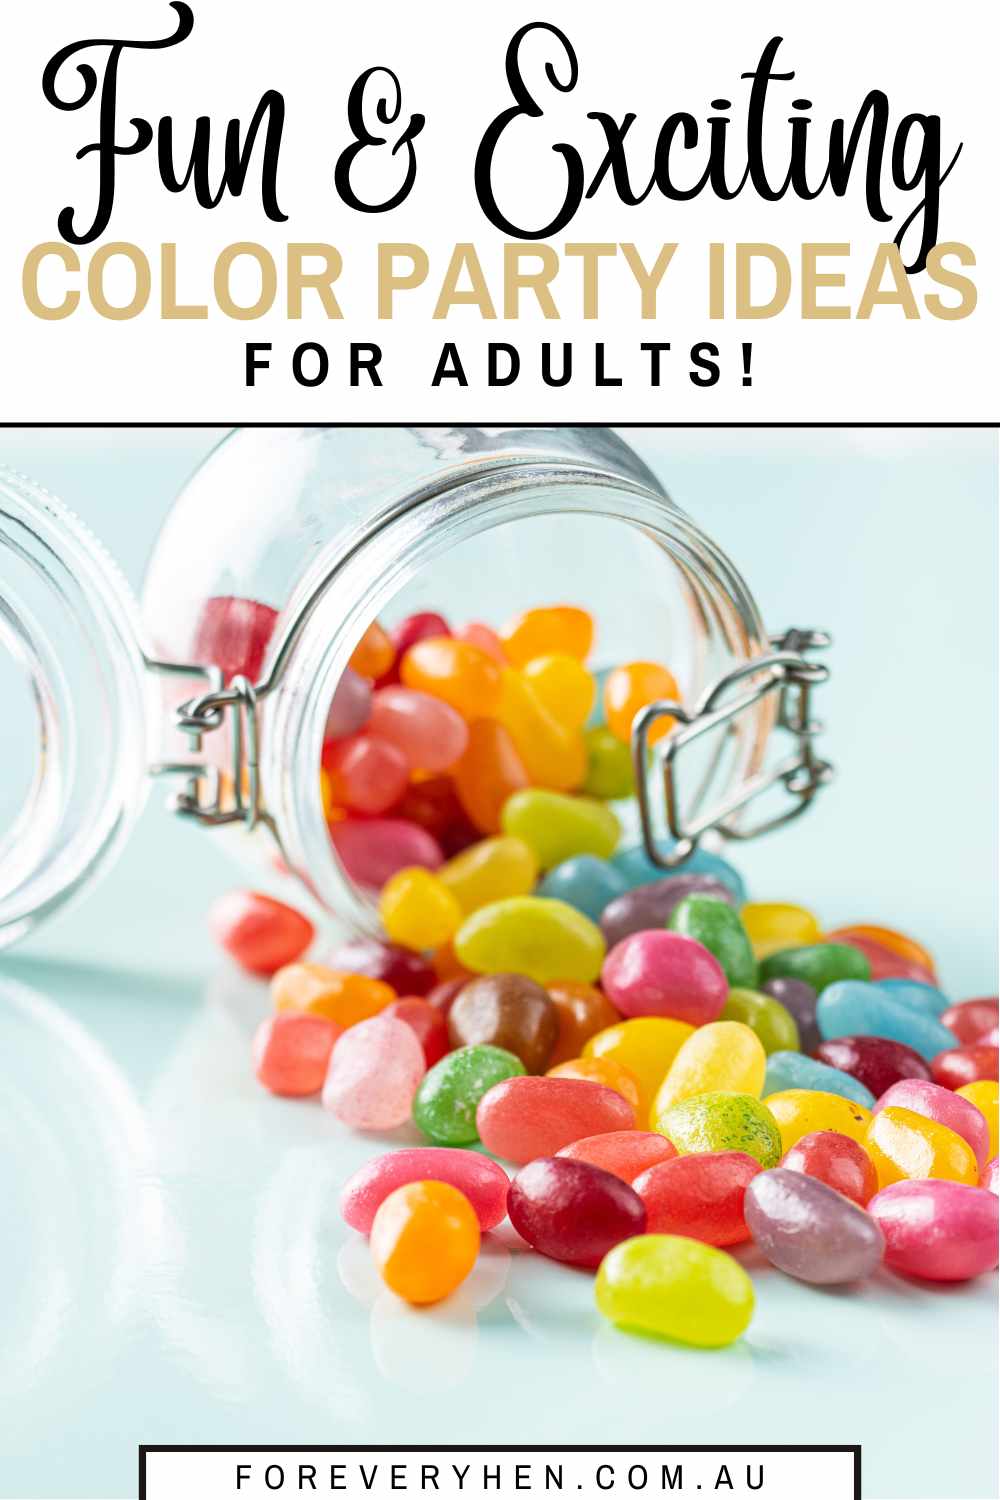 Jellybeans falling out of a glass jar. Text overlay: Fun and exciting color party ideas for adults!